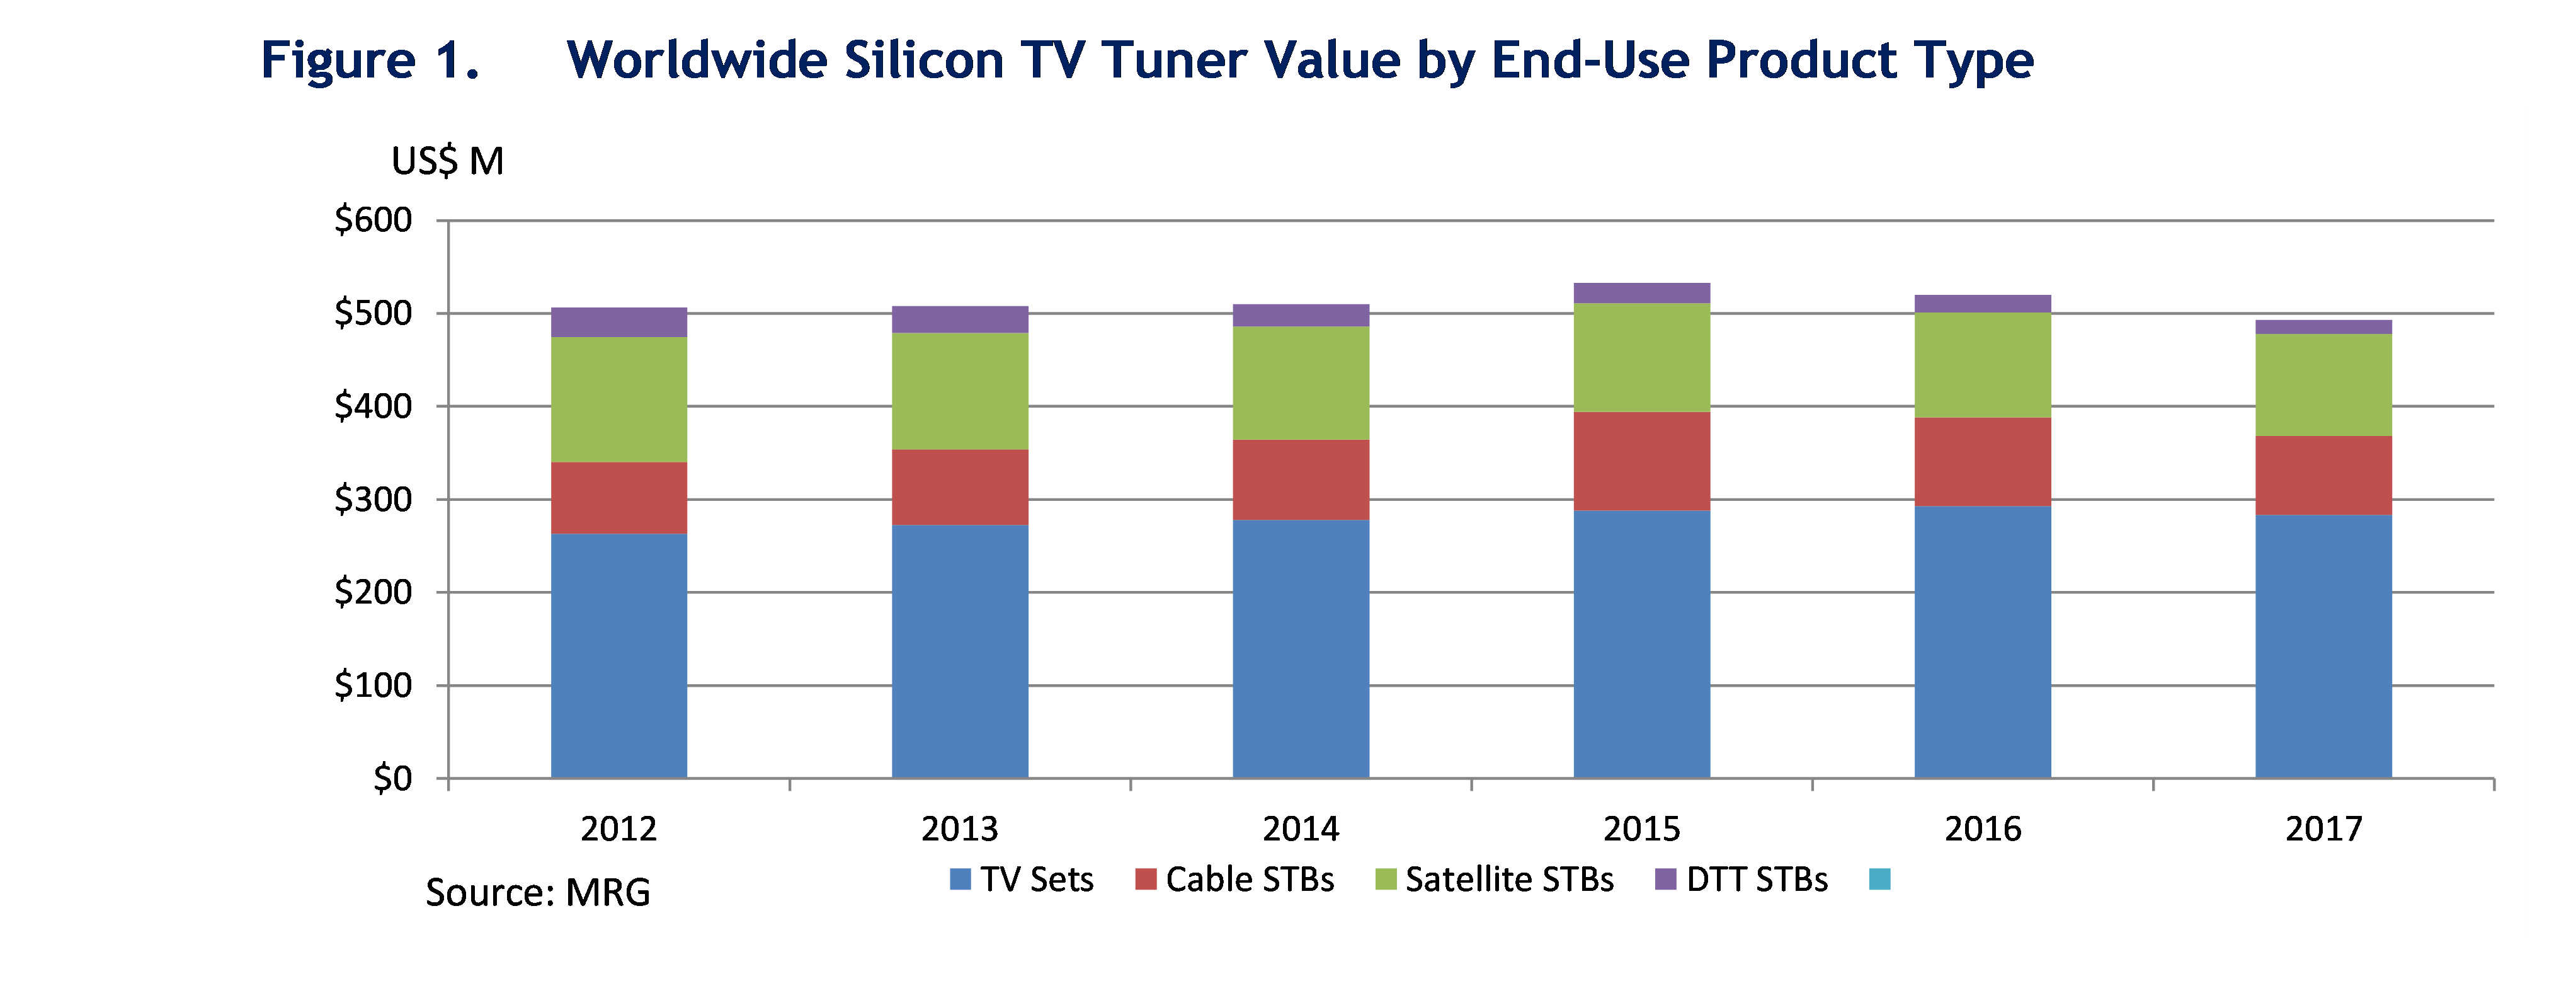 Worldwide Silicon TV Tuner Value by End-Use Product Type